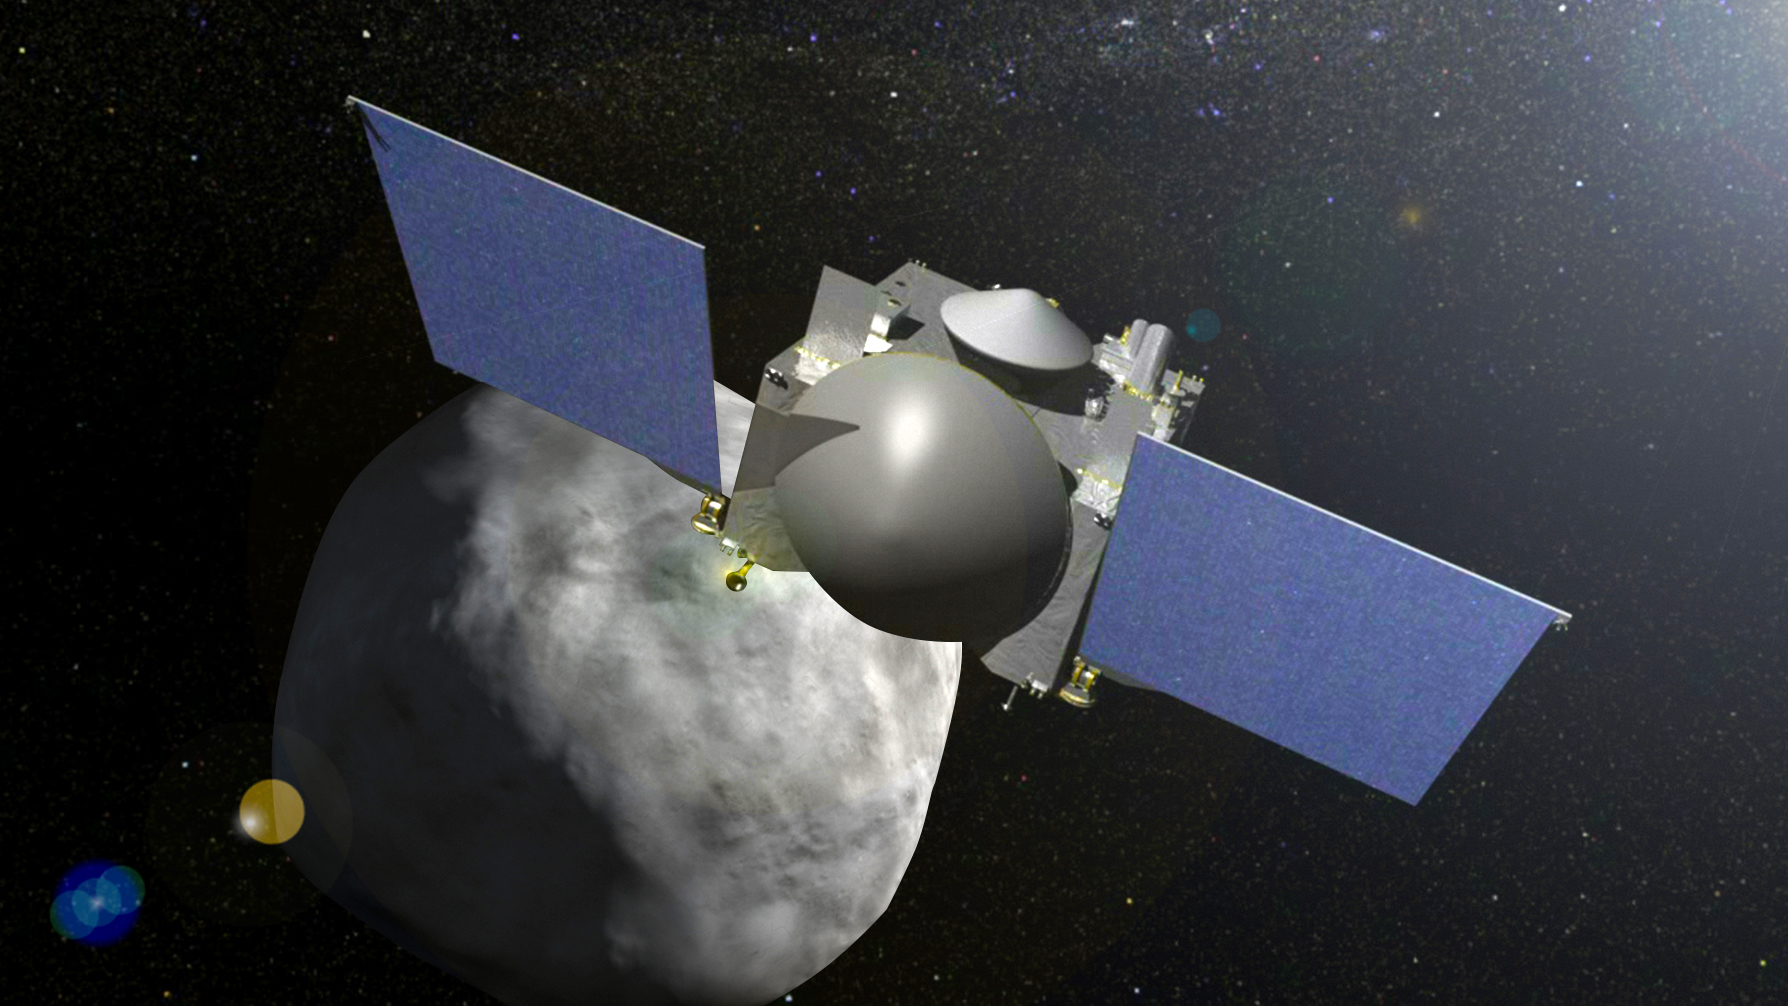 Preview Image for OSIRIS-REx Mission Overview